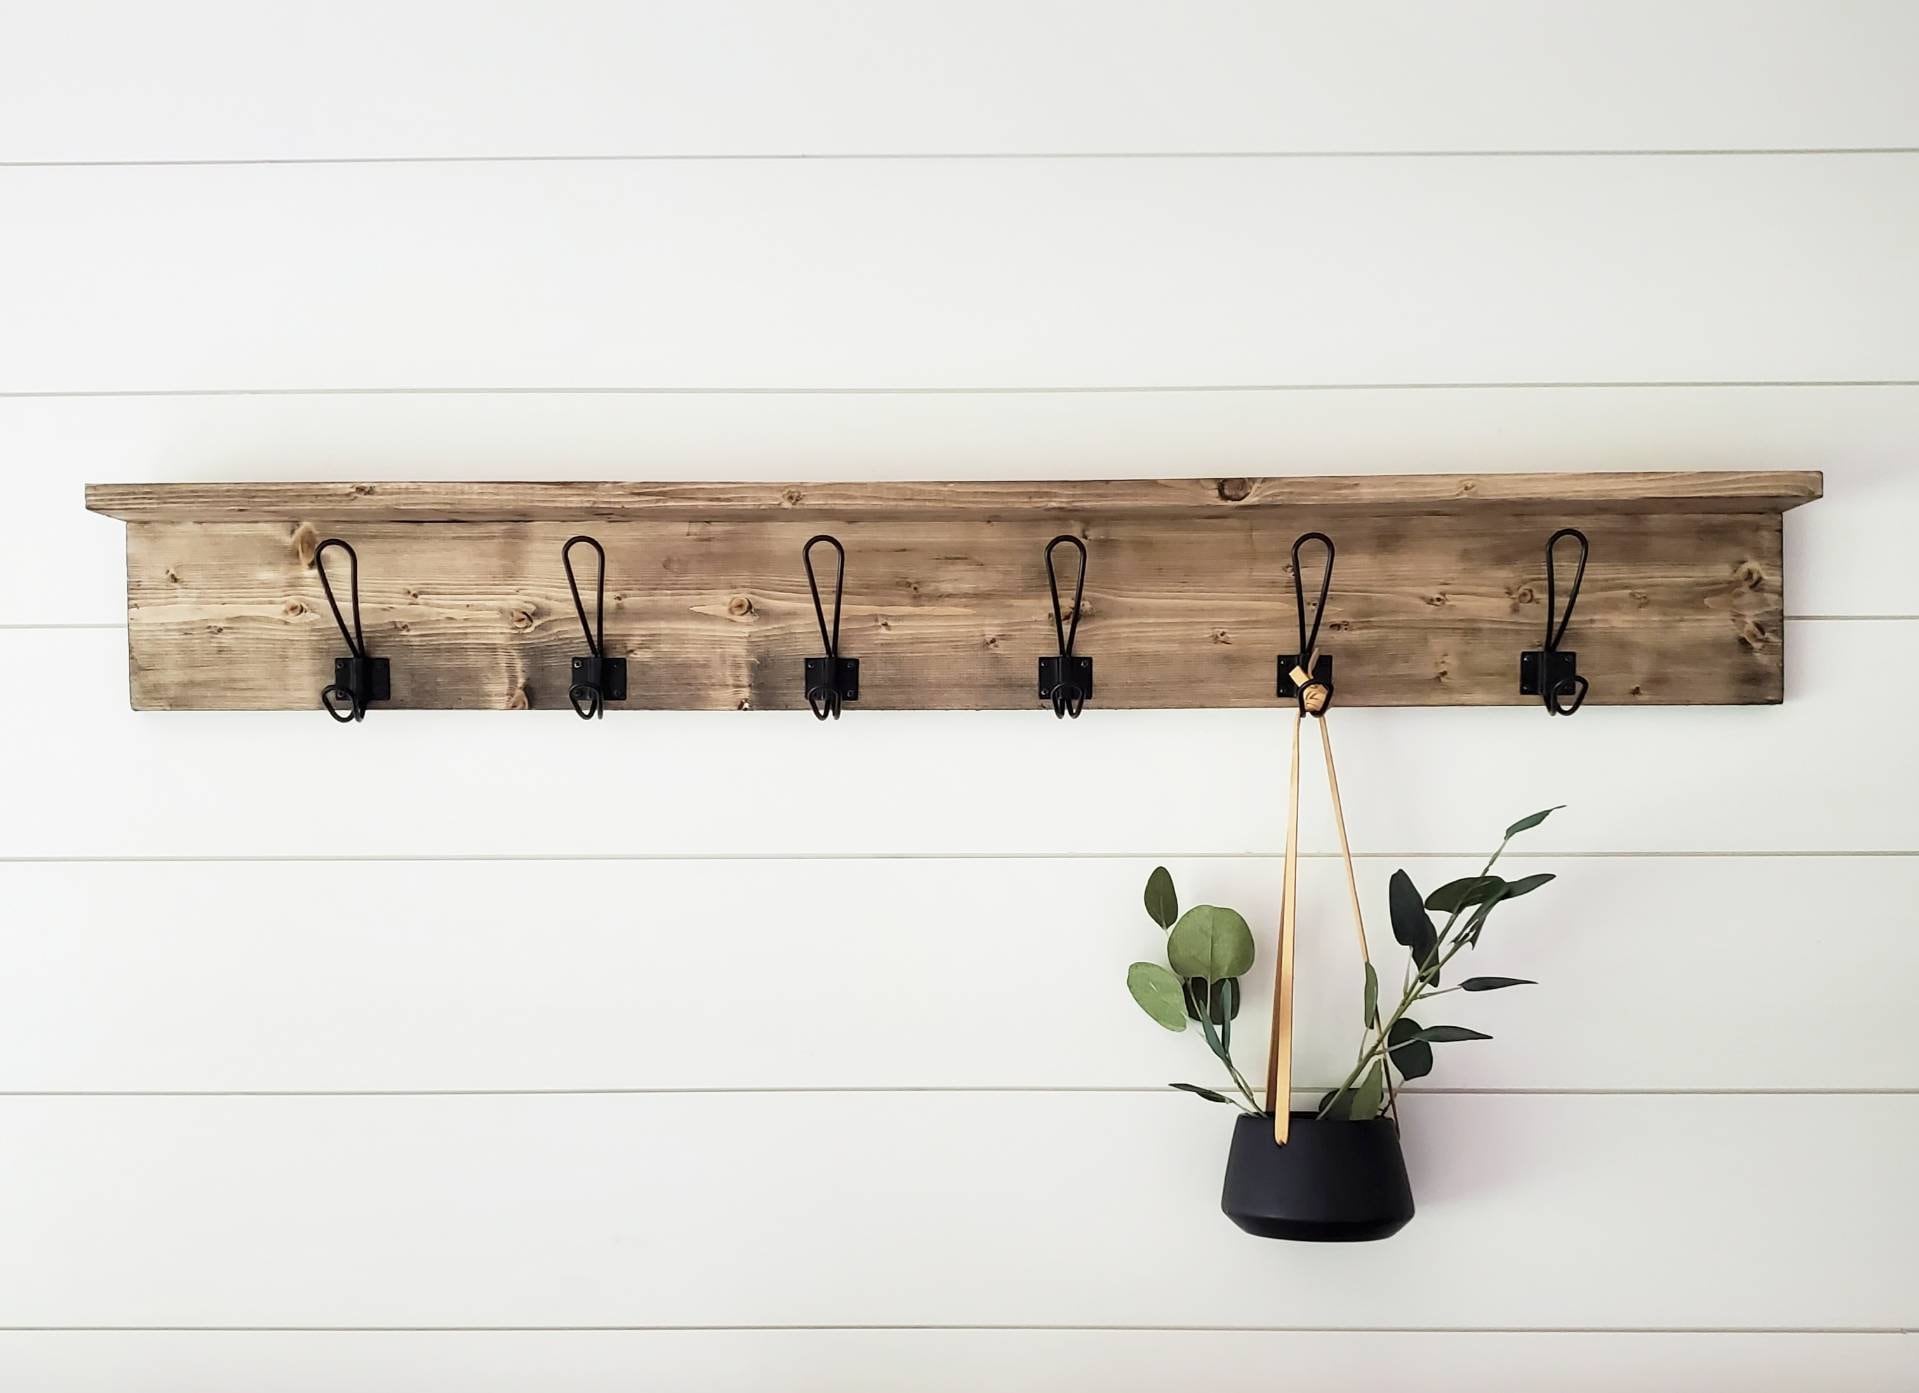 Rustic Wall Mounted Coat Rack with Shelves - Perfect for Small Spaces